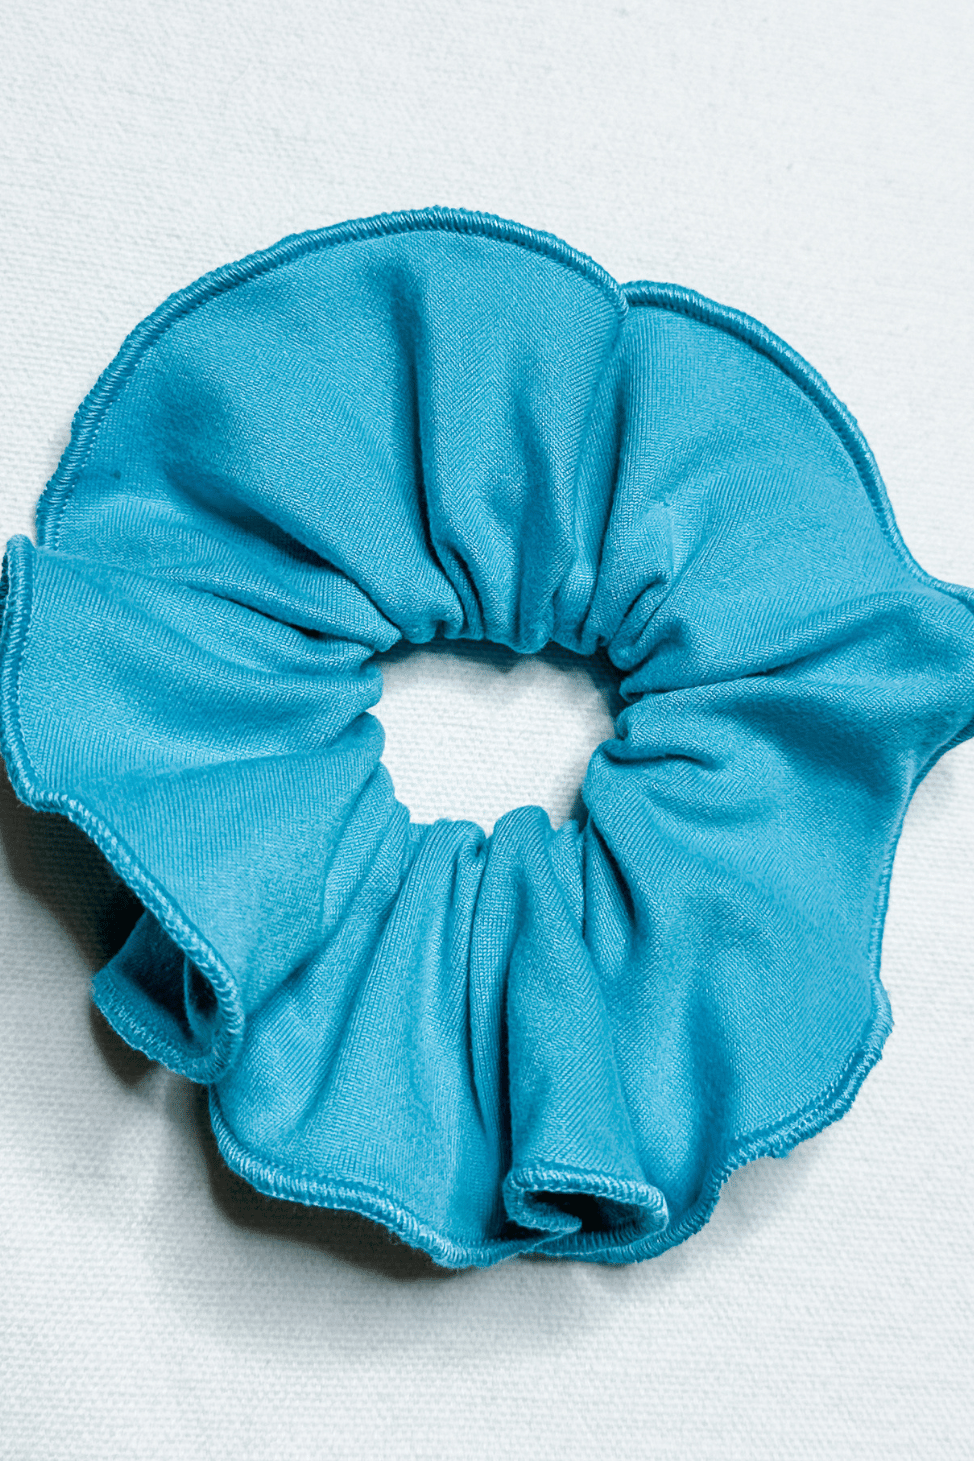 Scrunchie in Turquoise color from Diane Kroe